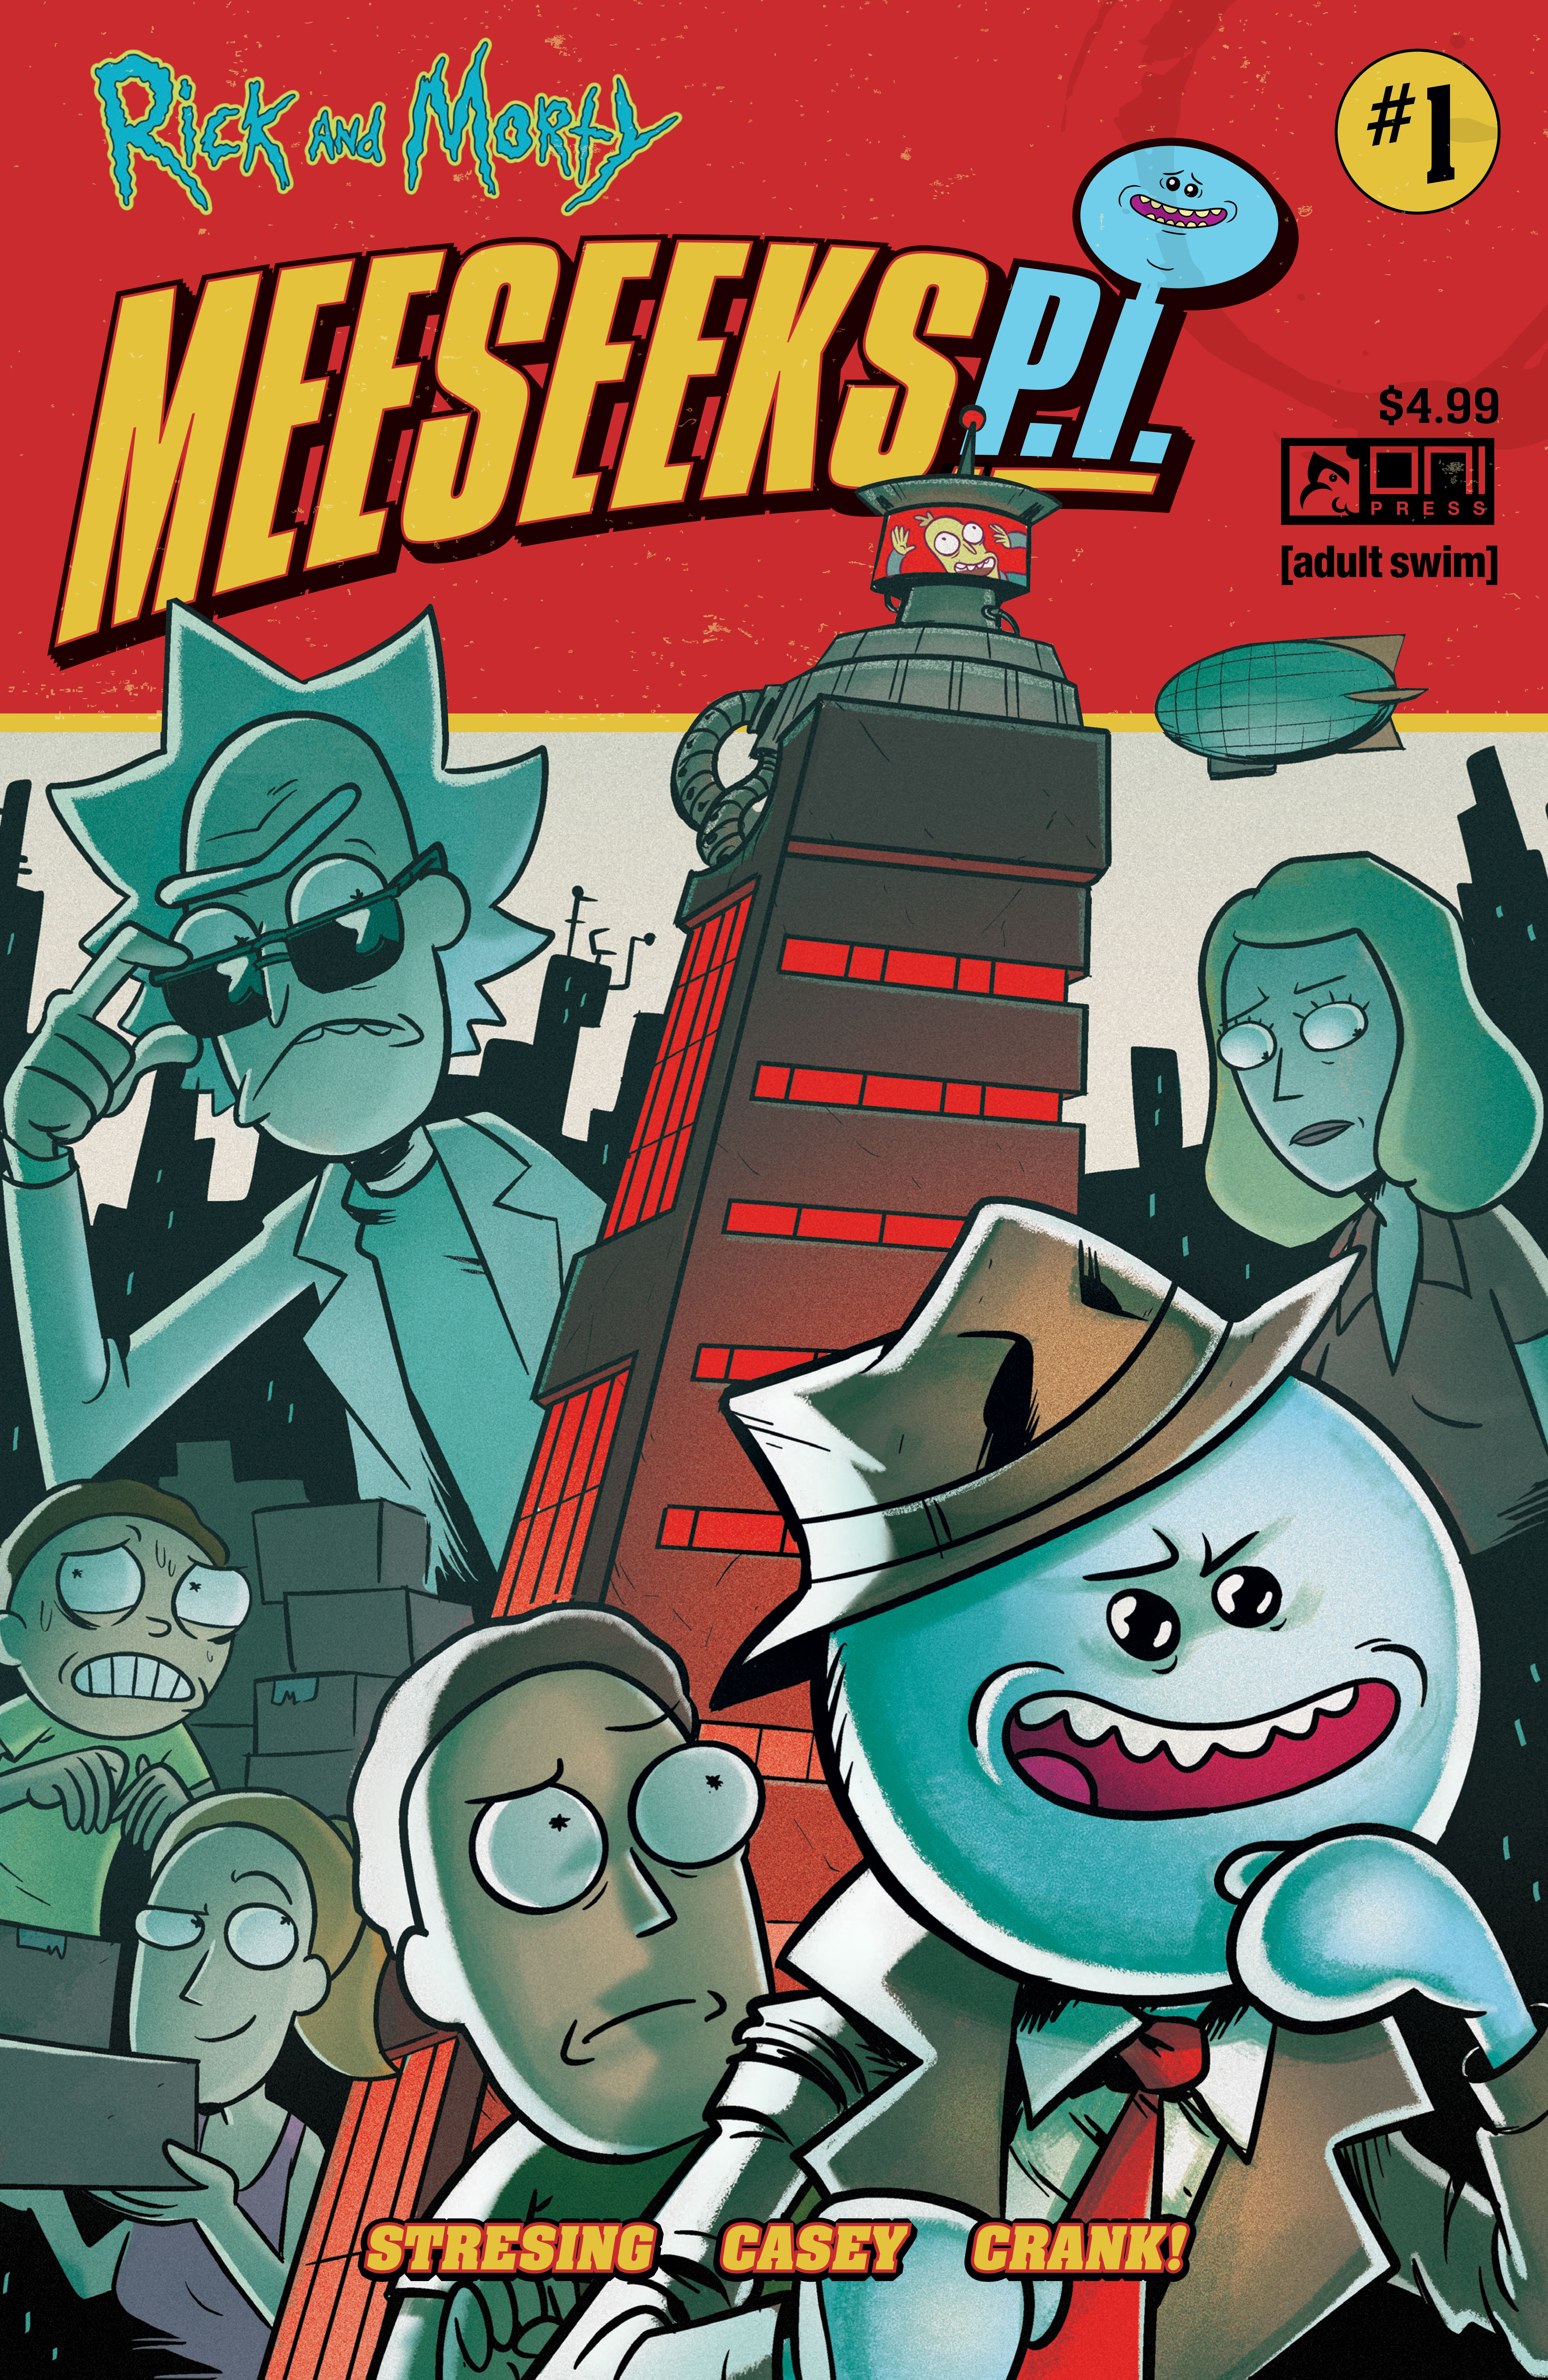 Rick and Morty Meeseeks P.I. #1 Cover A Fred C Stresing & Meg Casey (Mature) (Of 4)